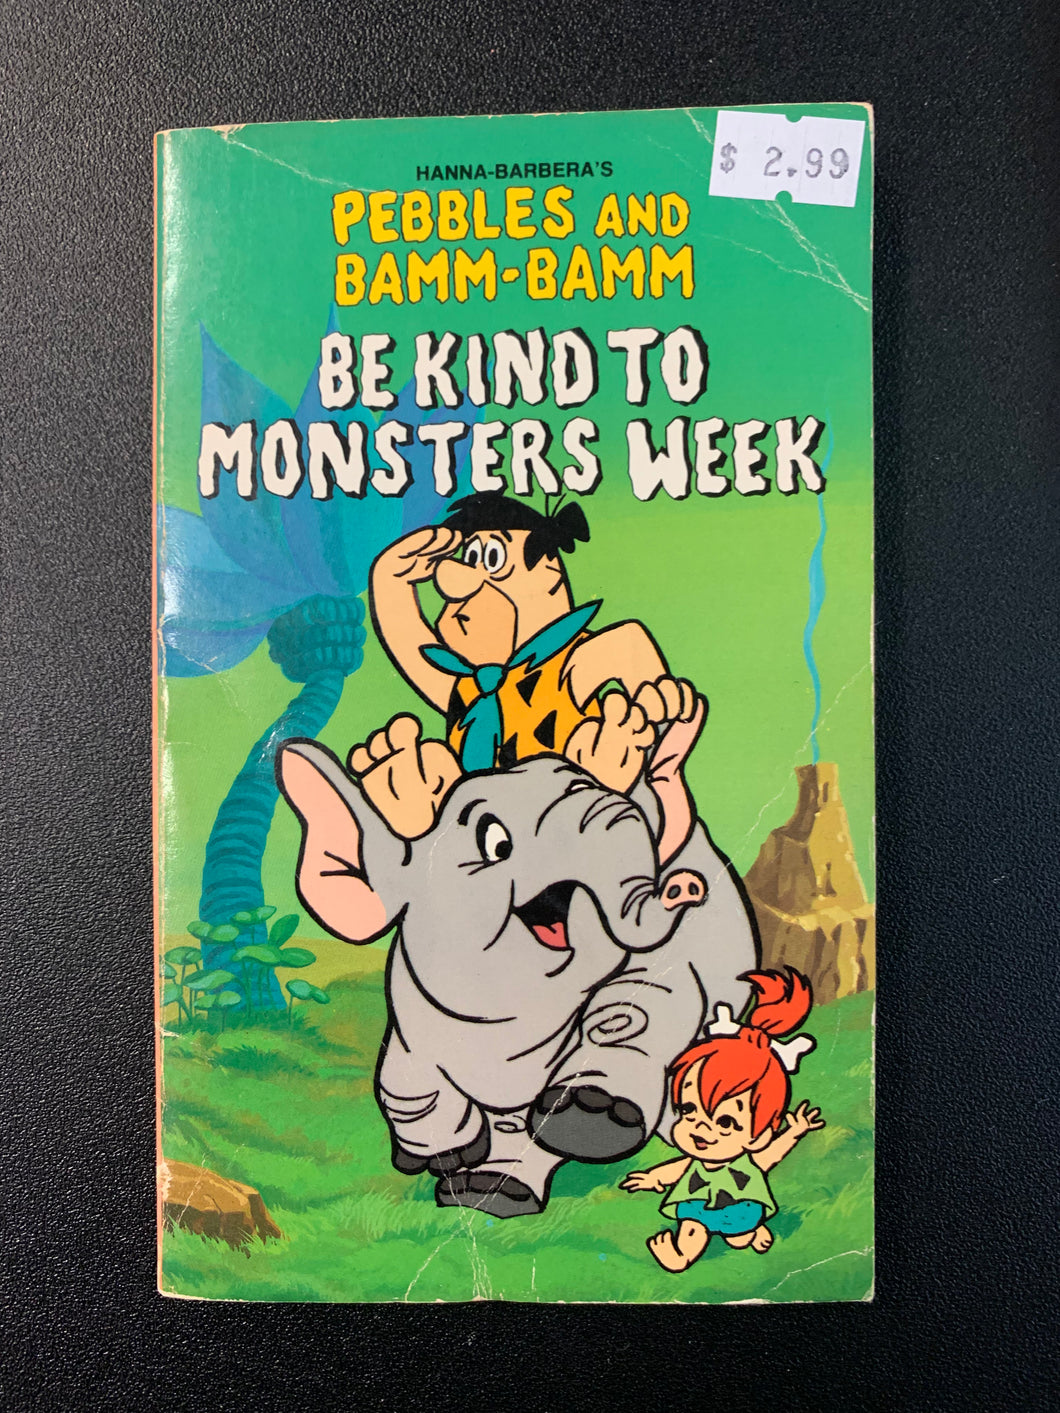 HANNA-BARBERA’S PEBBLES AND BAMM-BAMM BE KIND TO MONSTERS WEEK BOOK